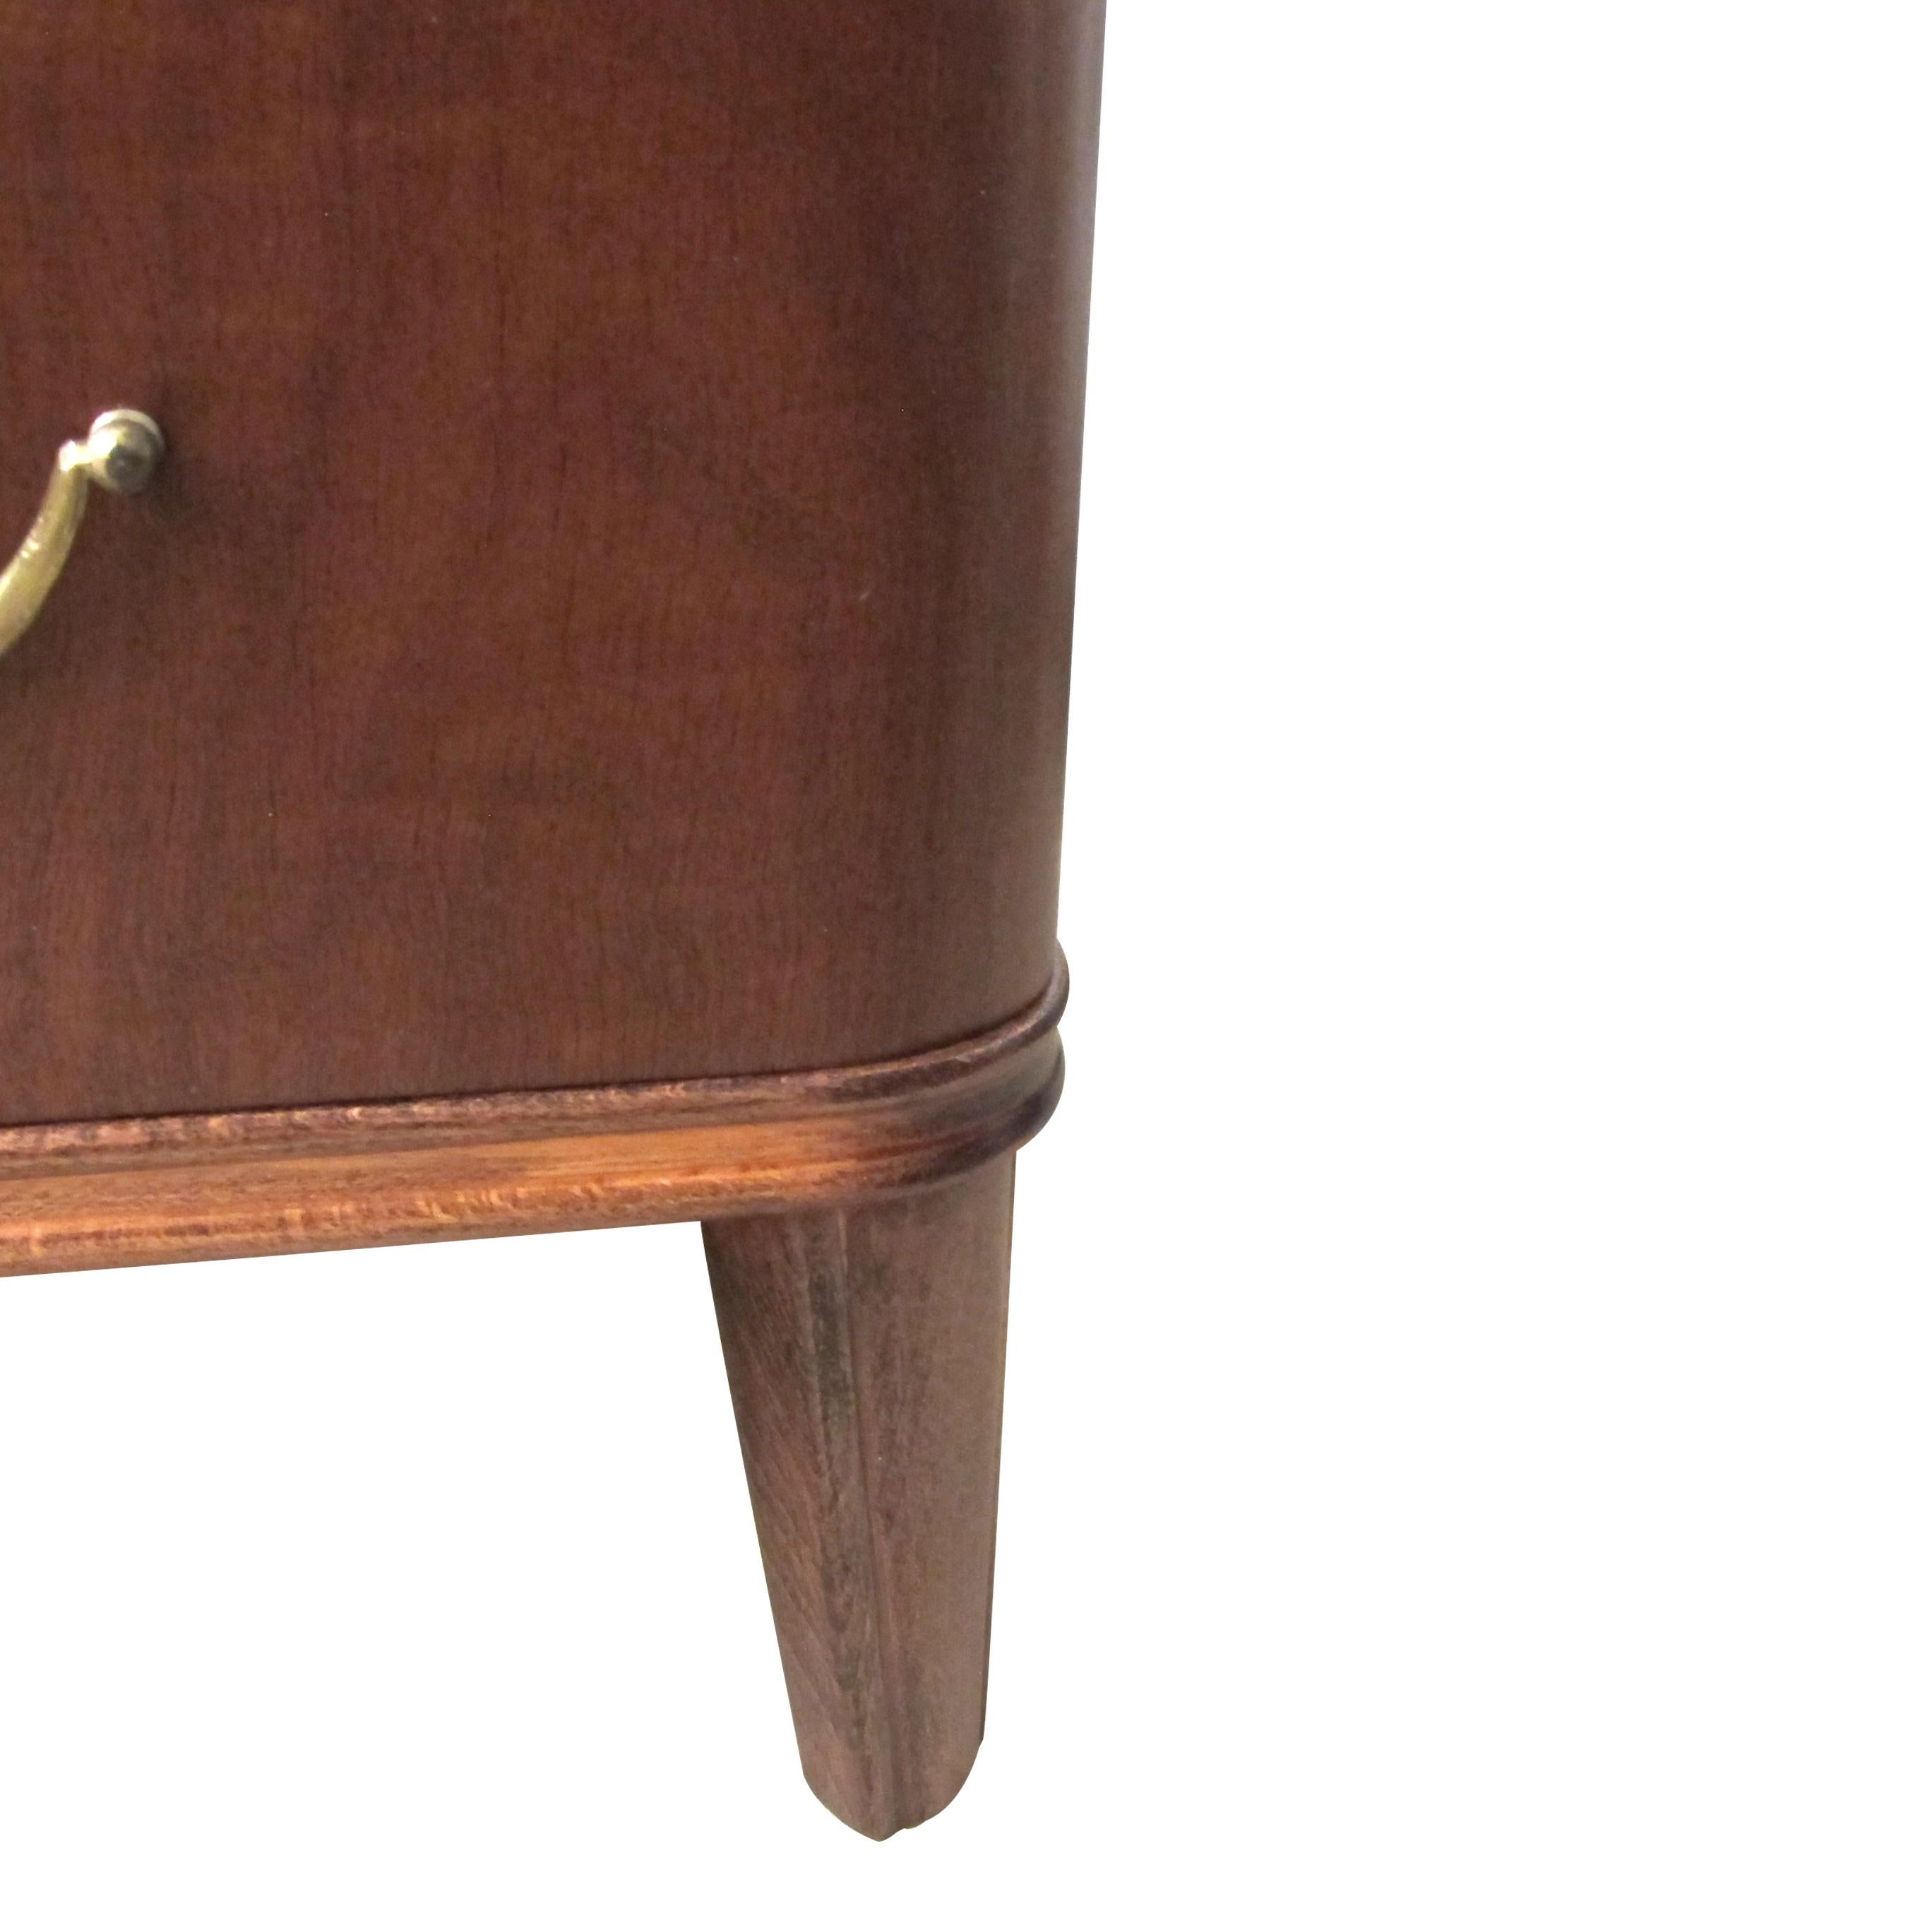 1940s Swedish Chest of Drawers with Walnut Veneers with Curved Edges For Sale 3